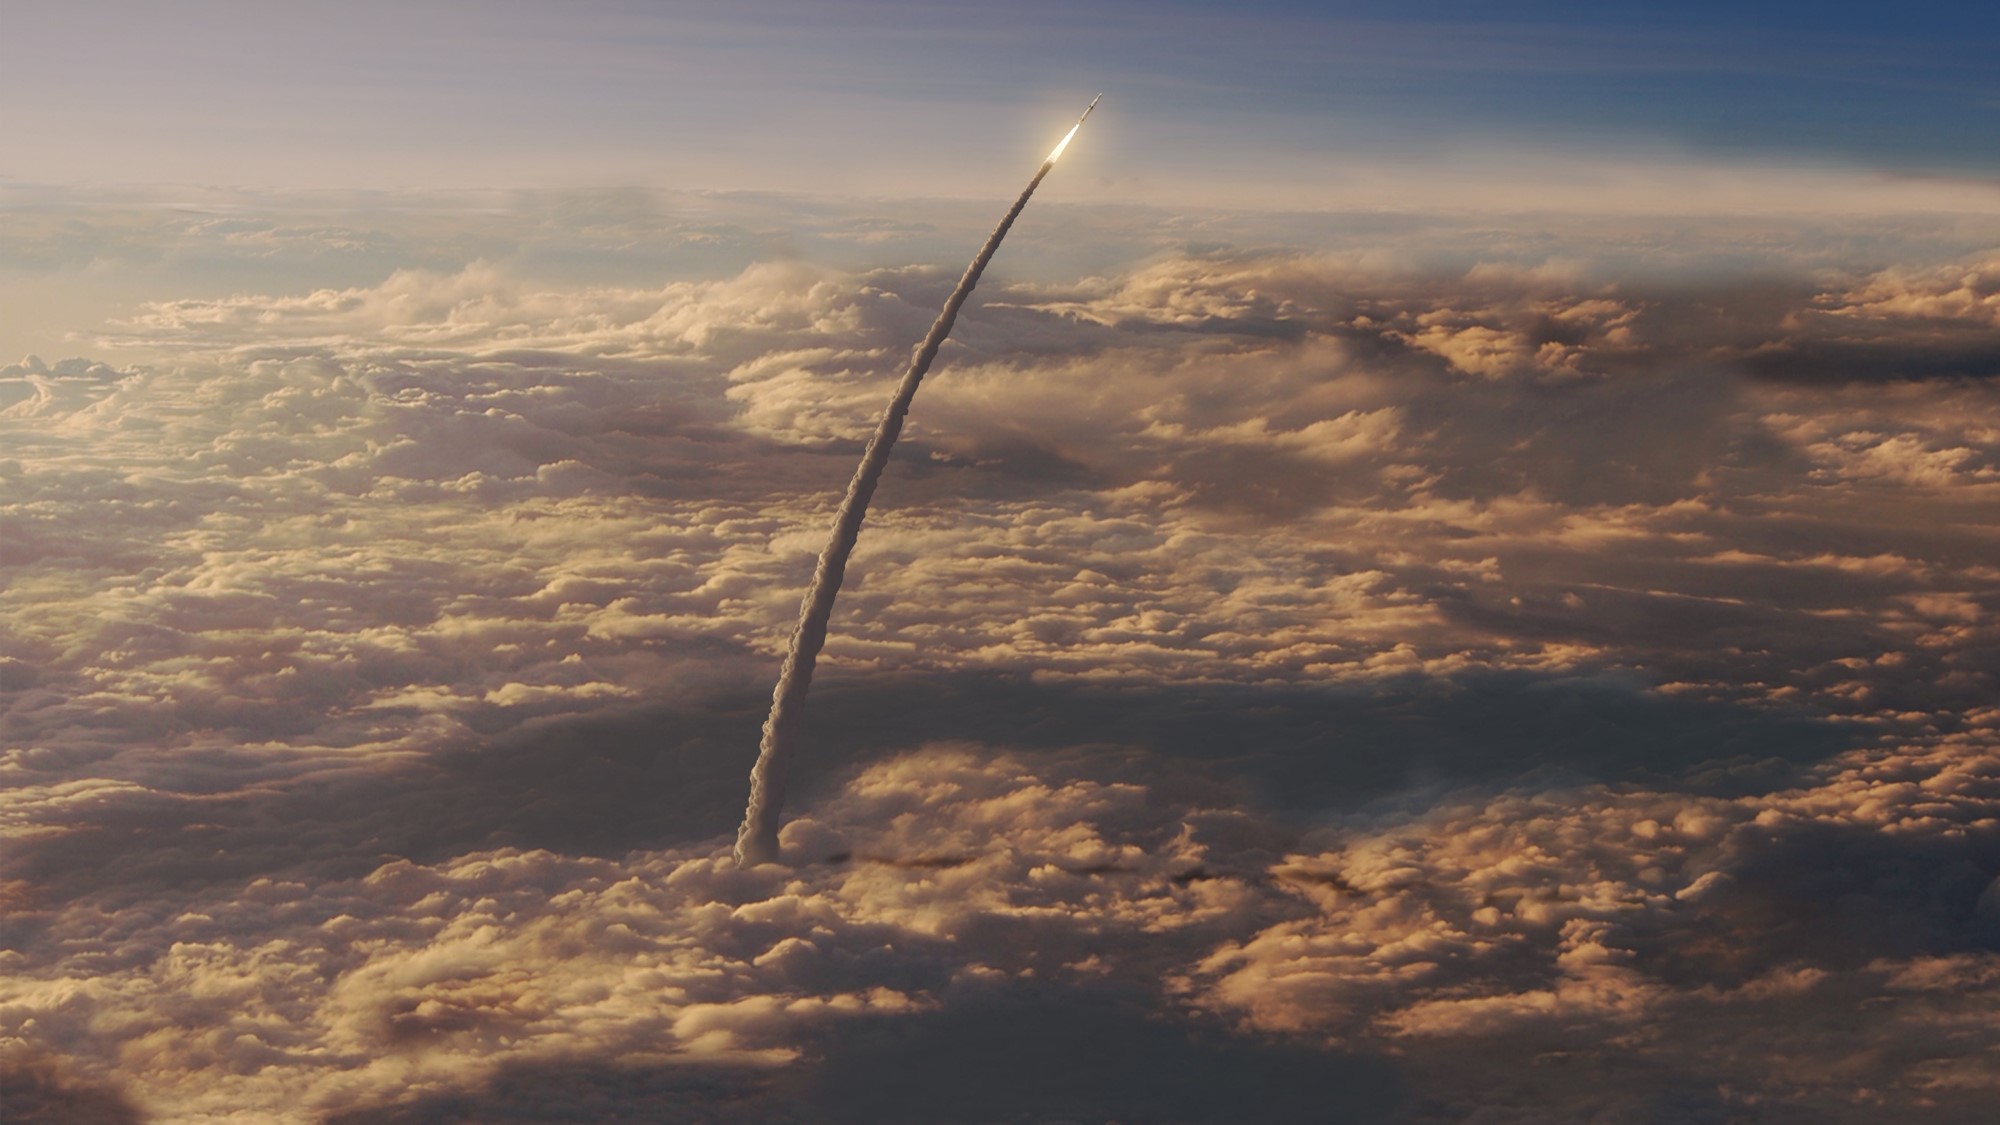 A rocket rising above the clouds.